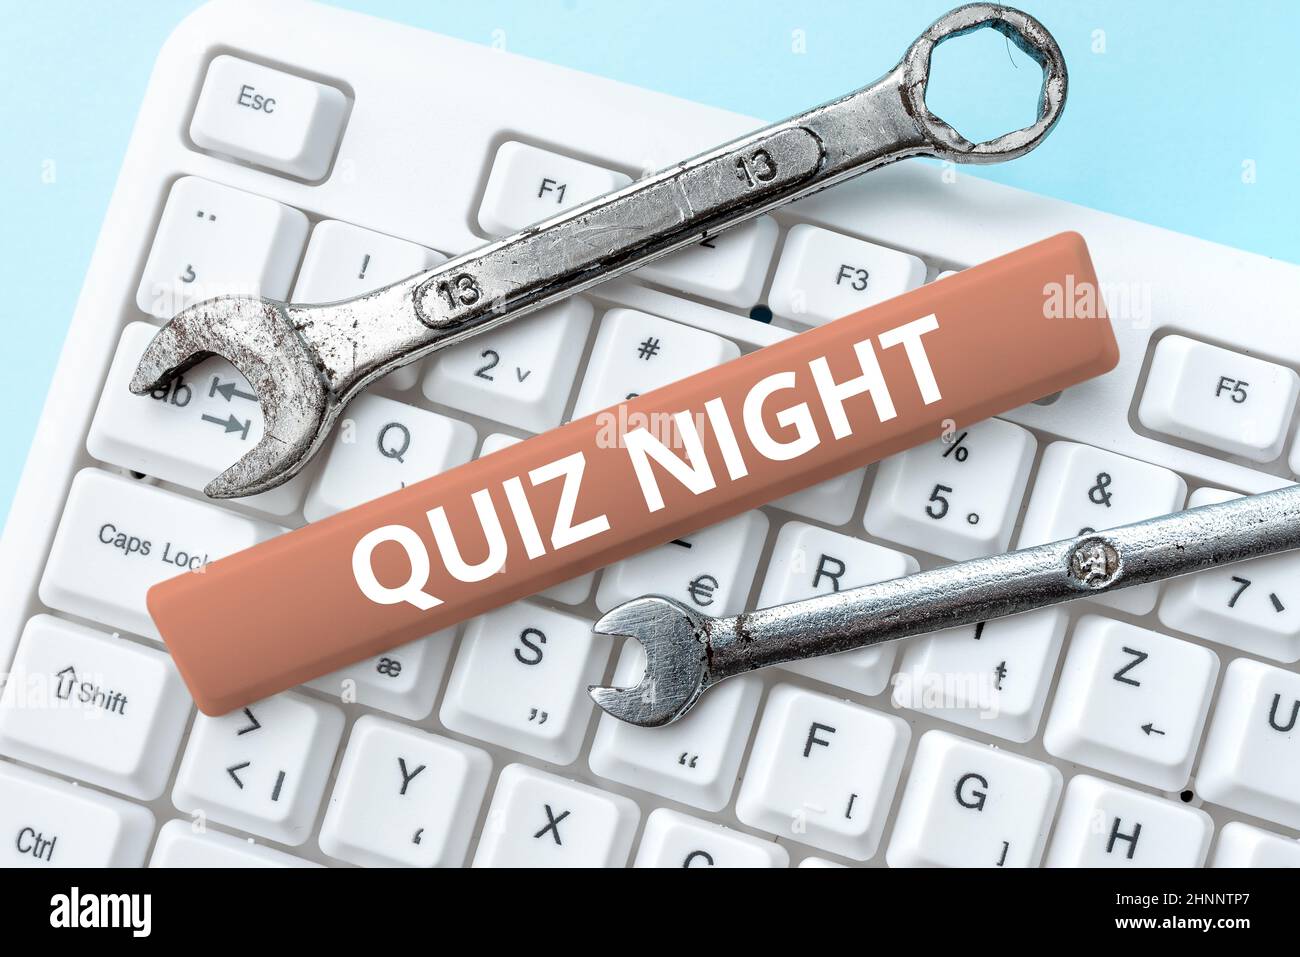 Hand writing sign Quiz Night. Business showcase evening test knowledge competition between individuals Abstract Fixing Outdated Websites, Maintaining Internet Connection Stock Photo